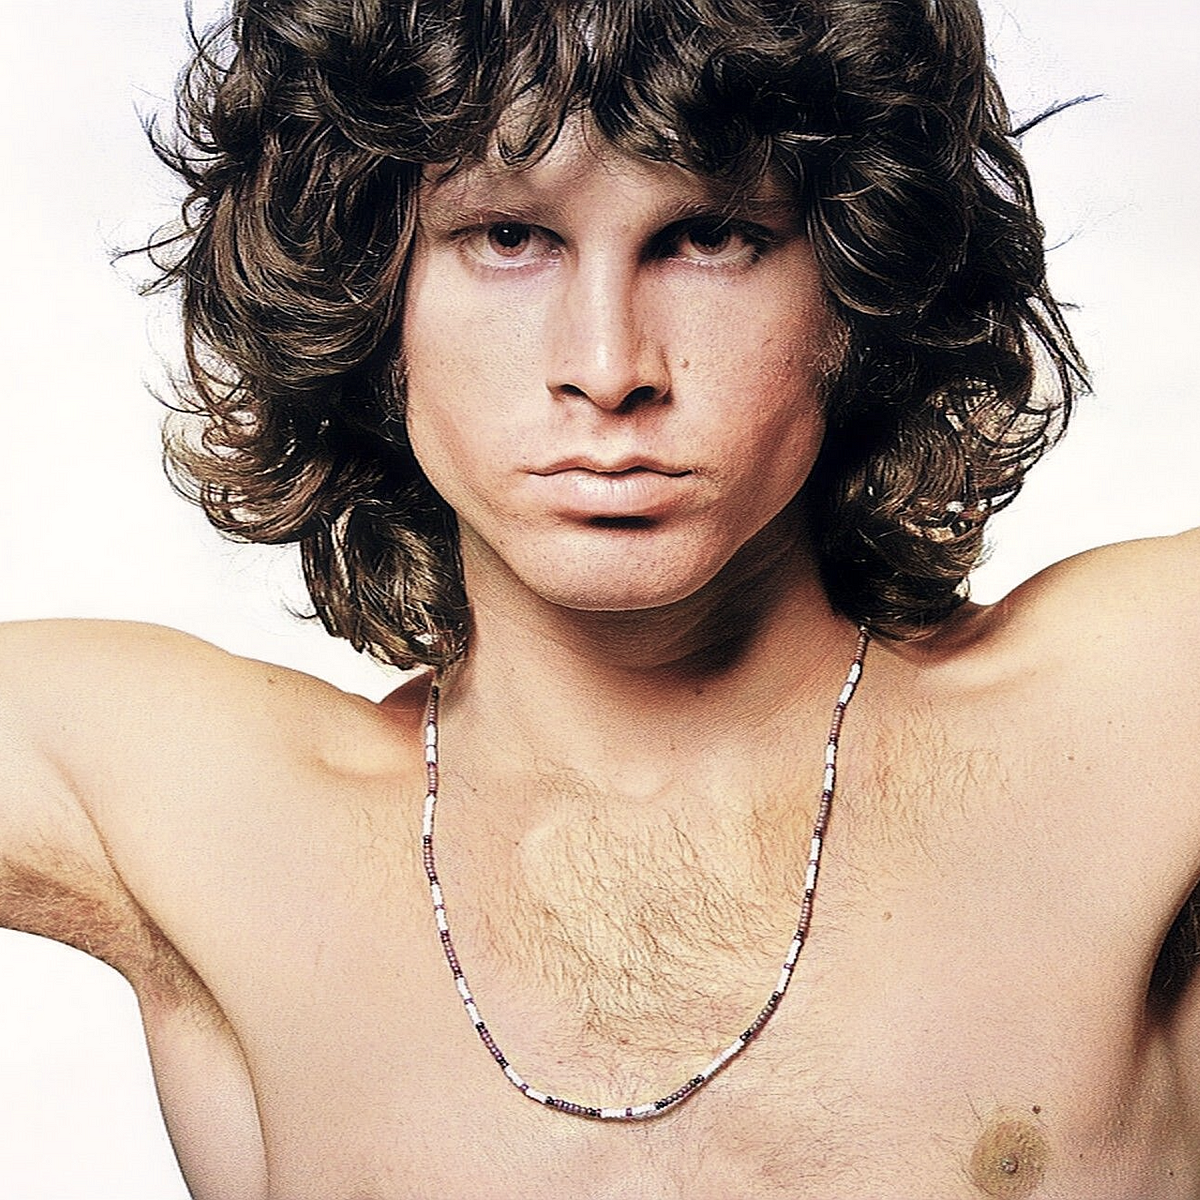 The sexuality of Jim Morrison